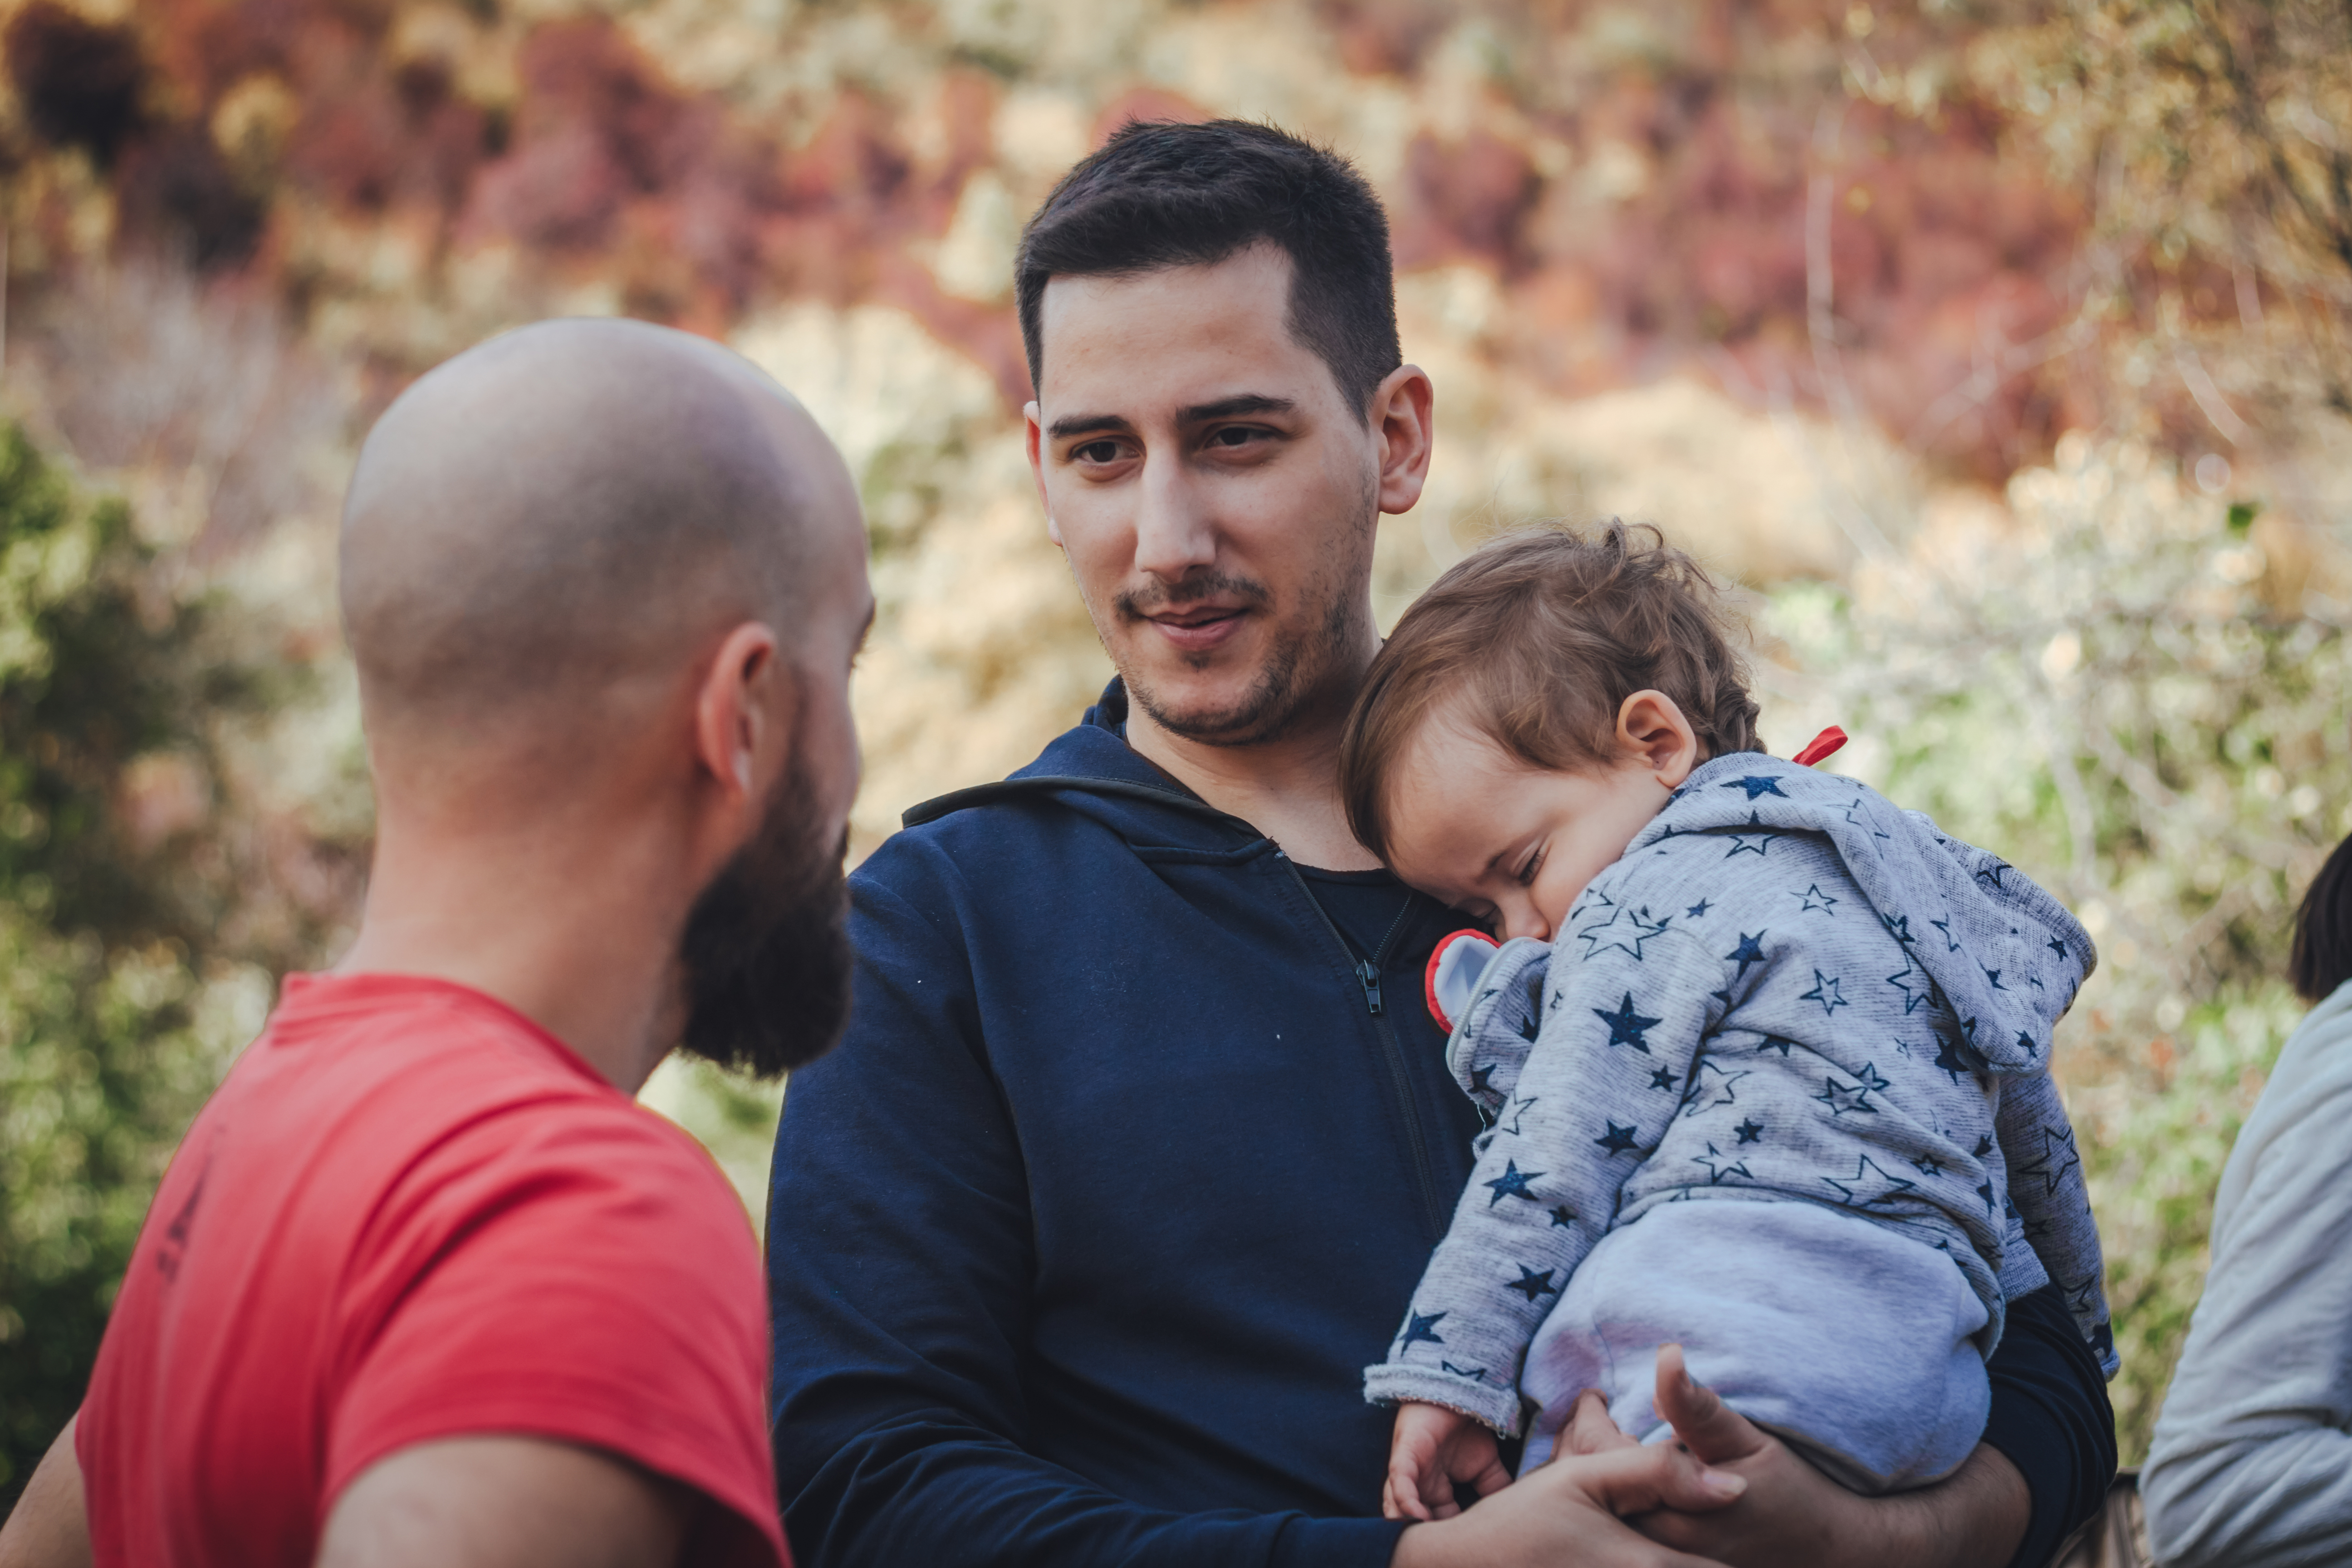 Two men talking and one of them holding a baby | Source: Shutterstock